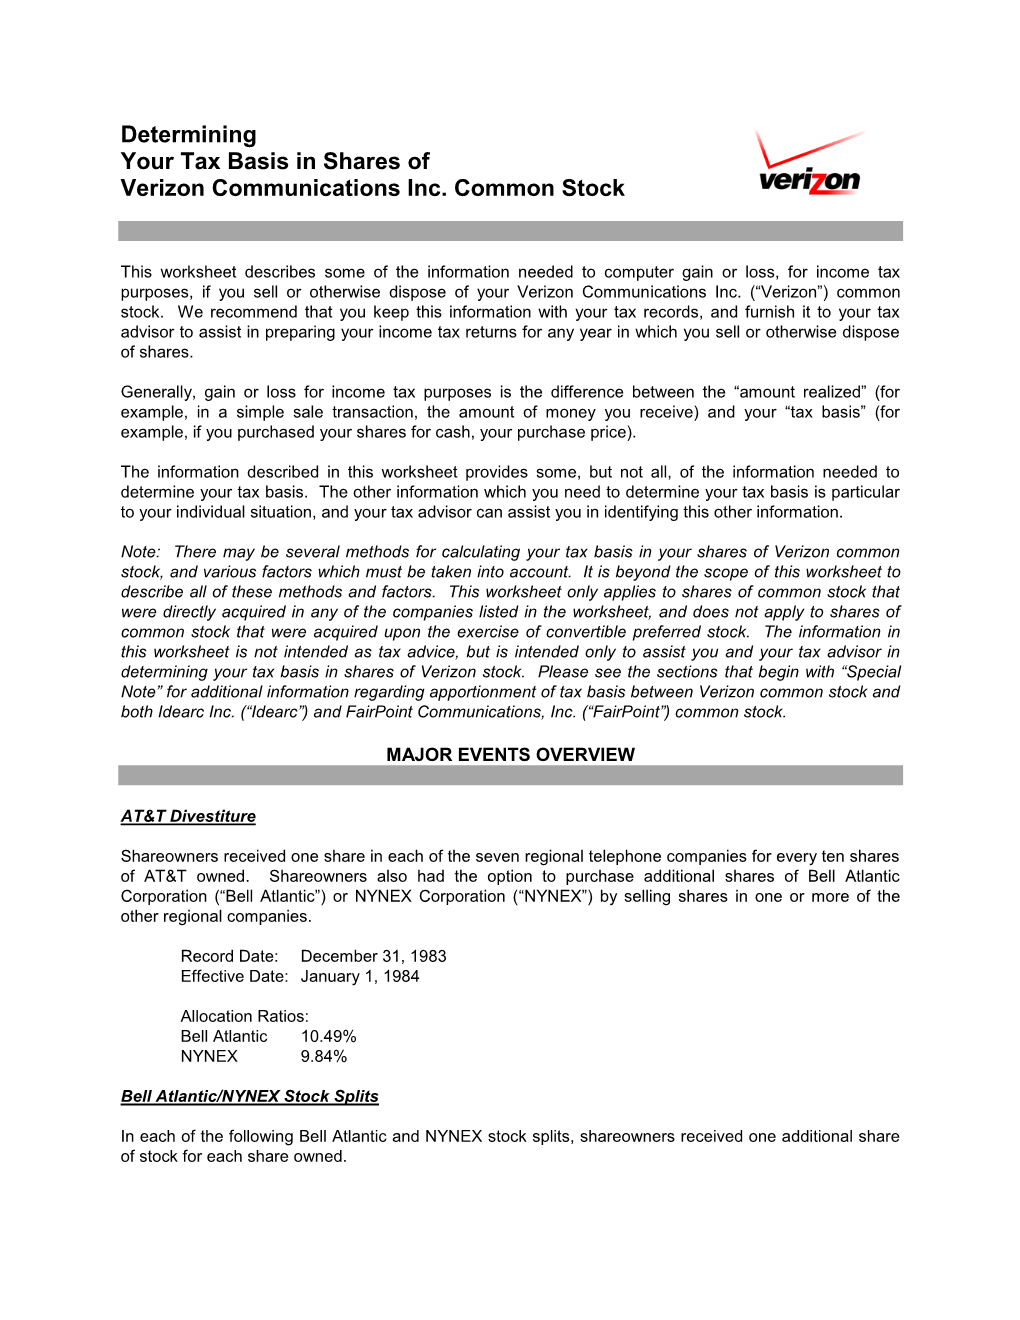 Determining Your Tax Basis in Shares of Verizon Communications Inc